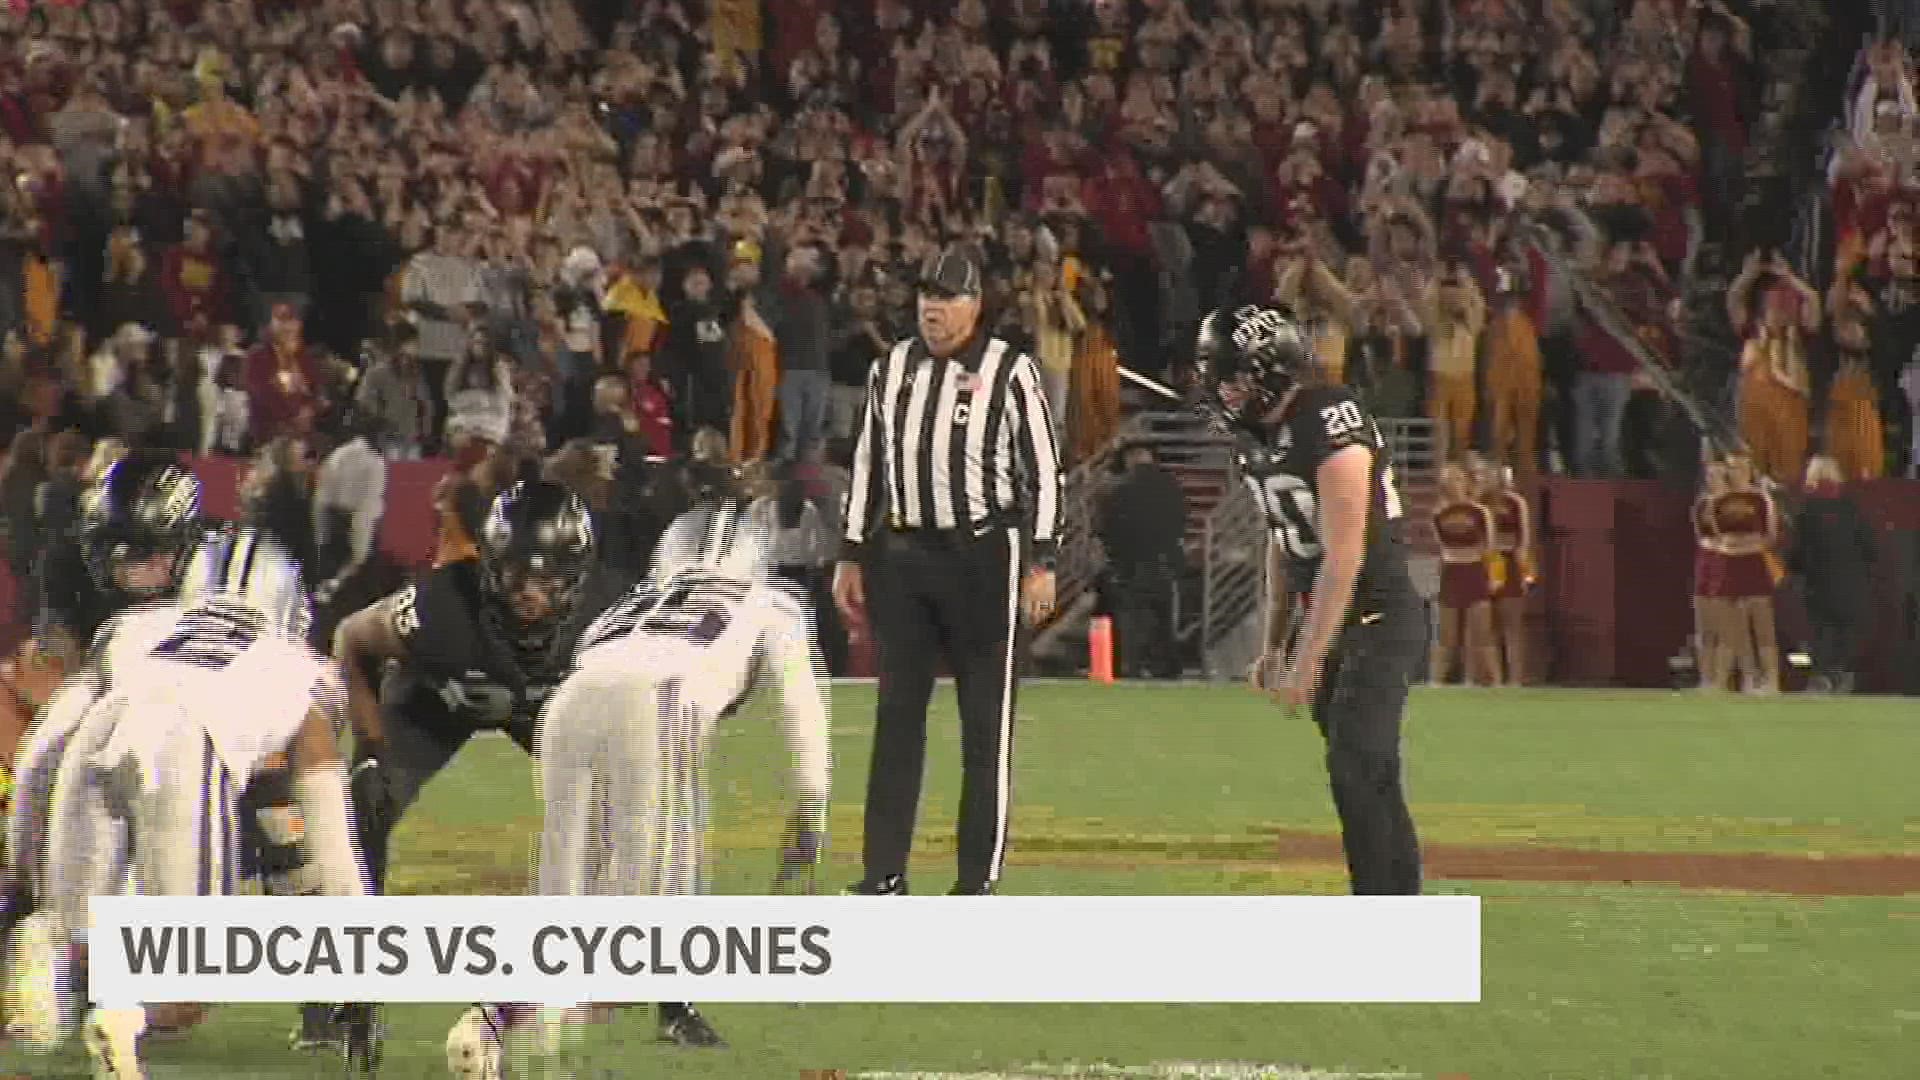 The Cyclones fell to 0-3 in Big 12 play after two straight losses to Baylor and Kansas.